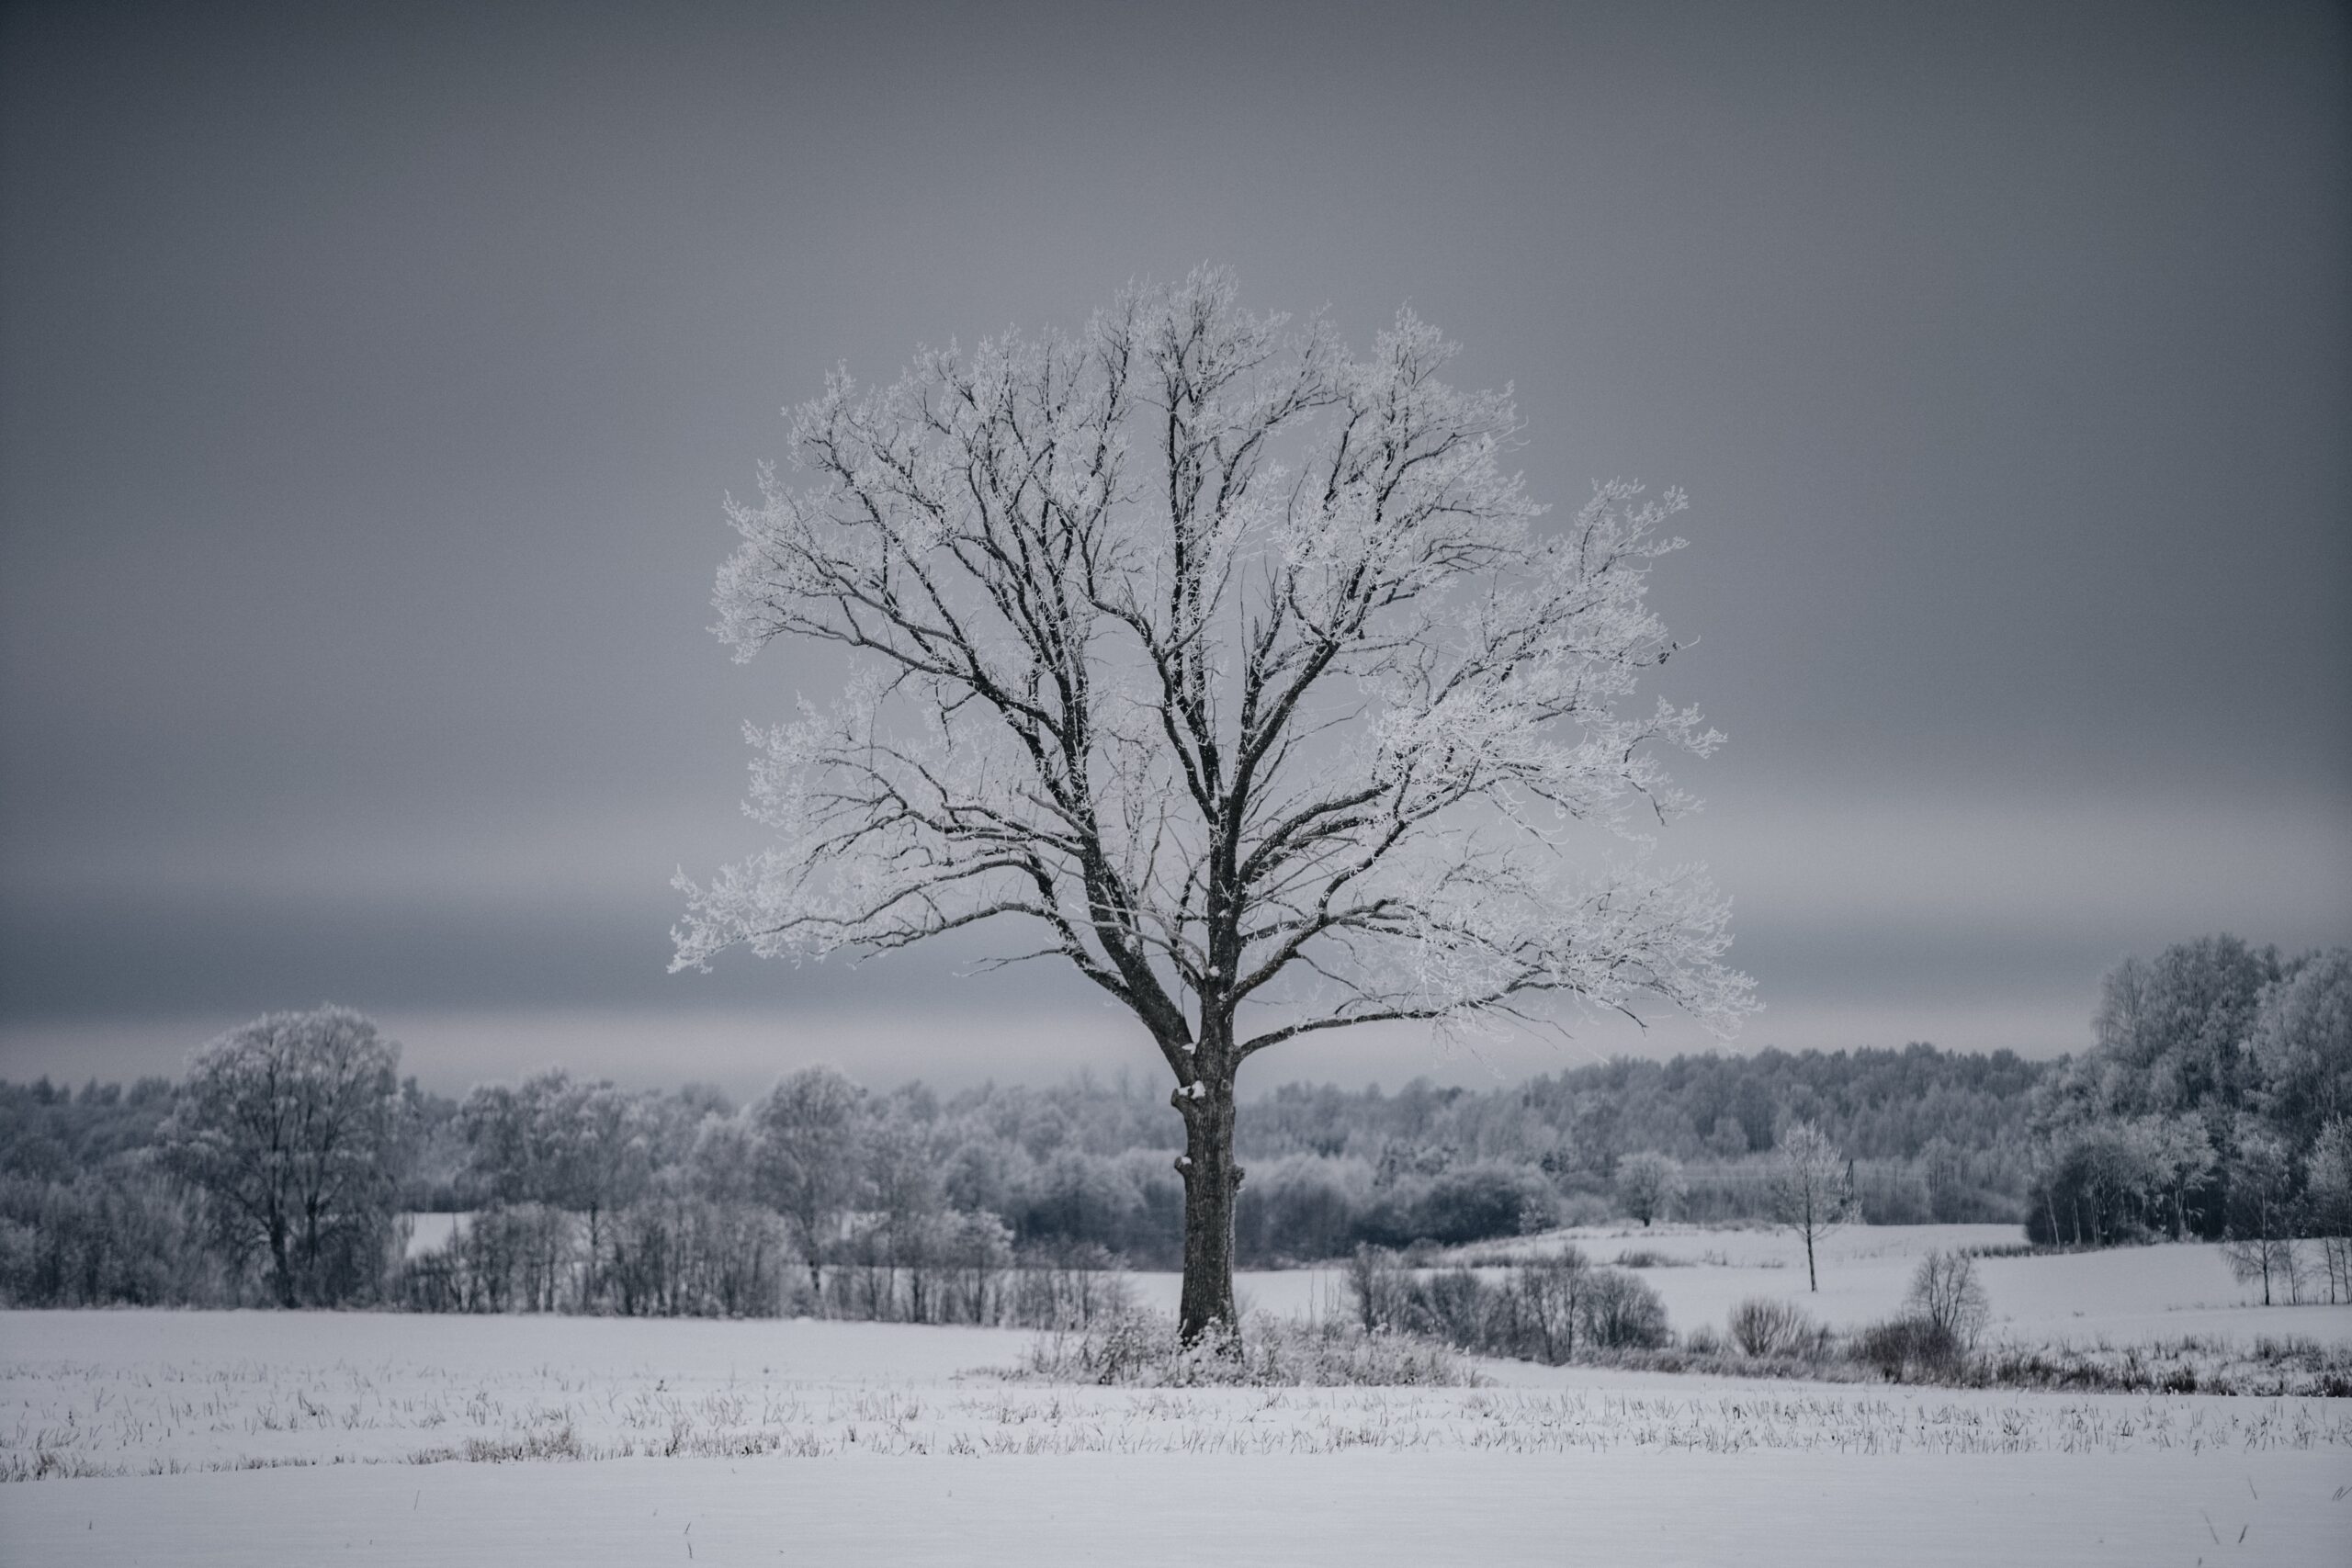 A tree in a snowy landscape with dark skies